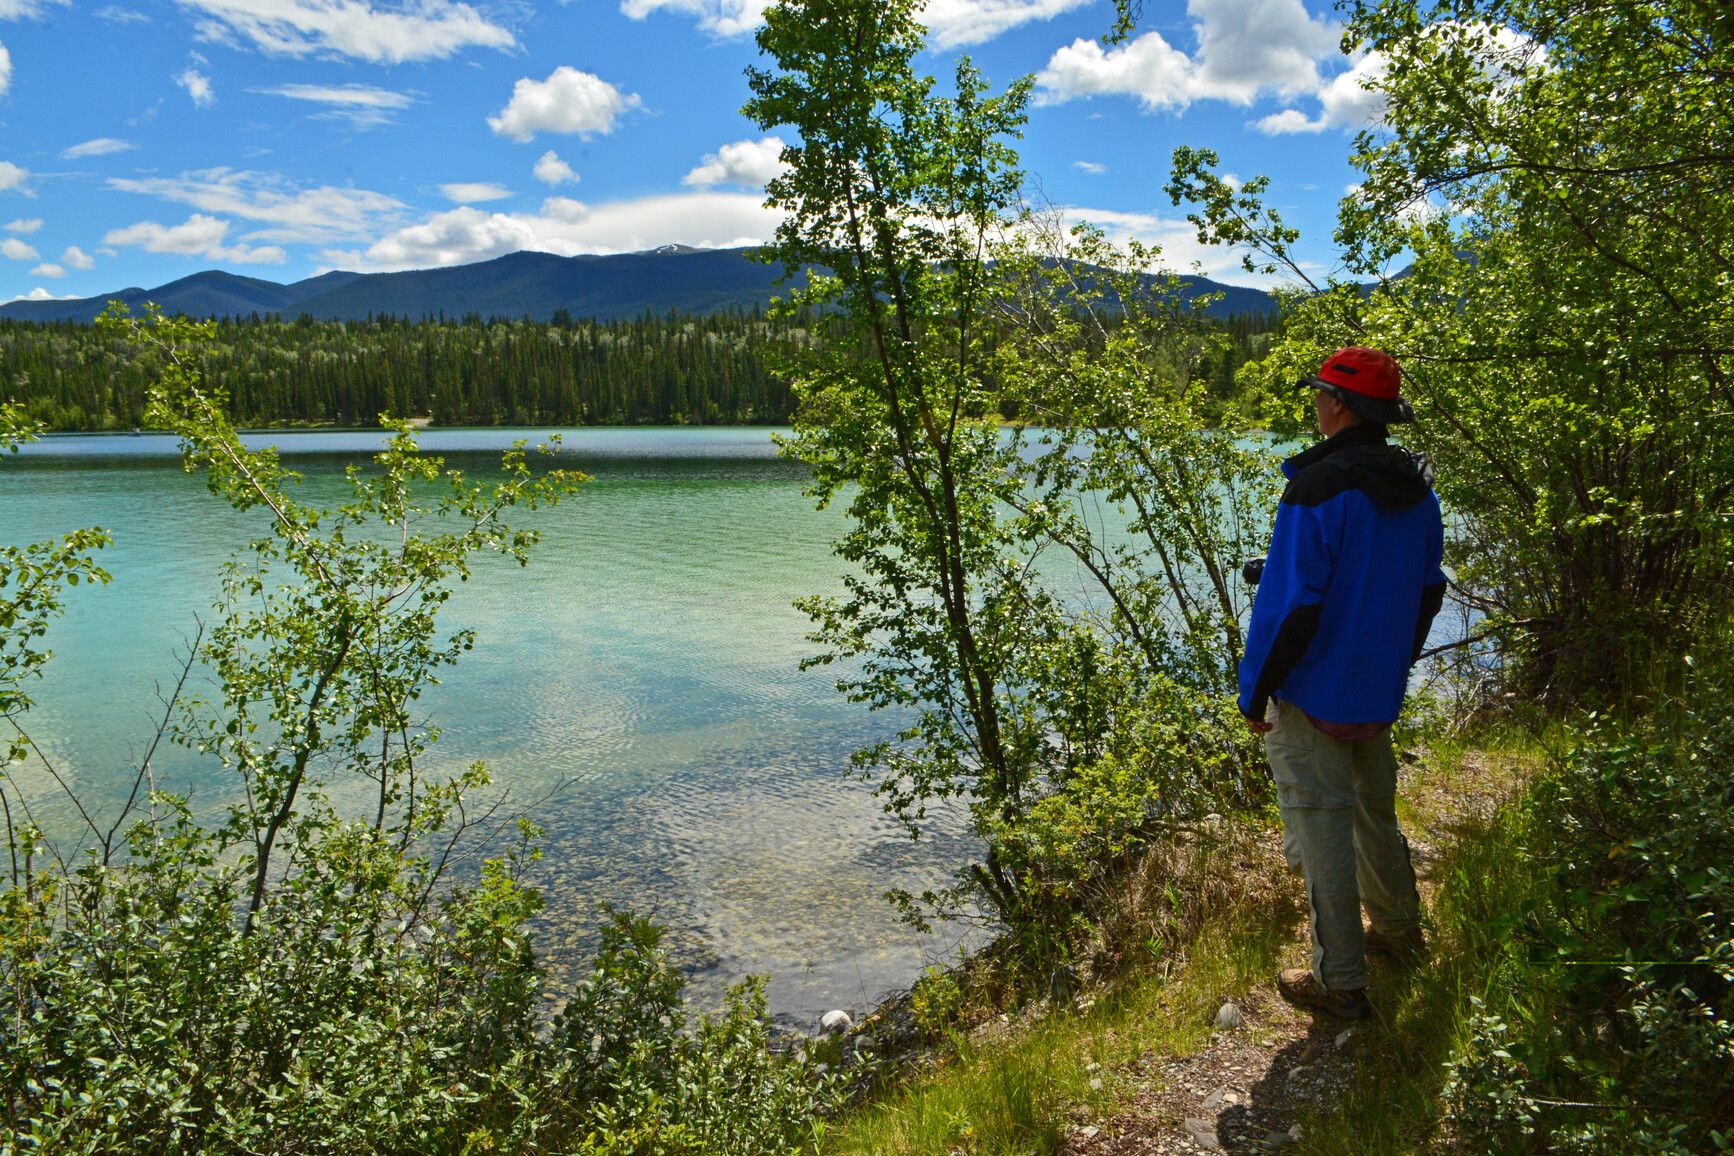 Under the clear summer sky, a visitor at Big Bar Lake Park casually takes in the view of the lake and mountains.